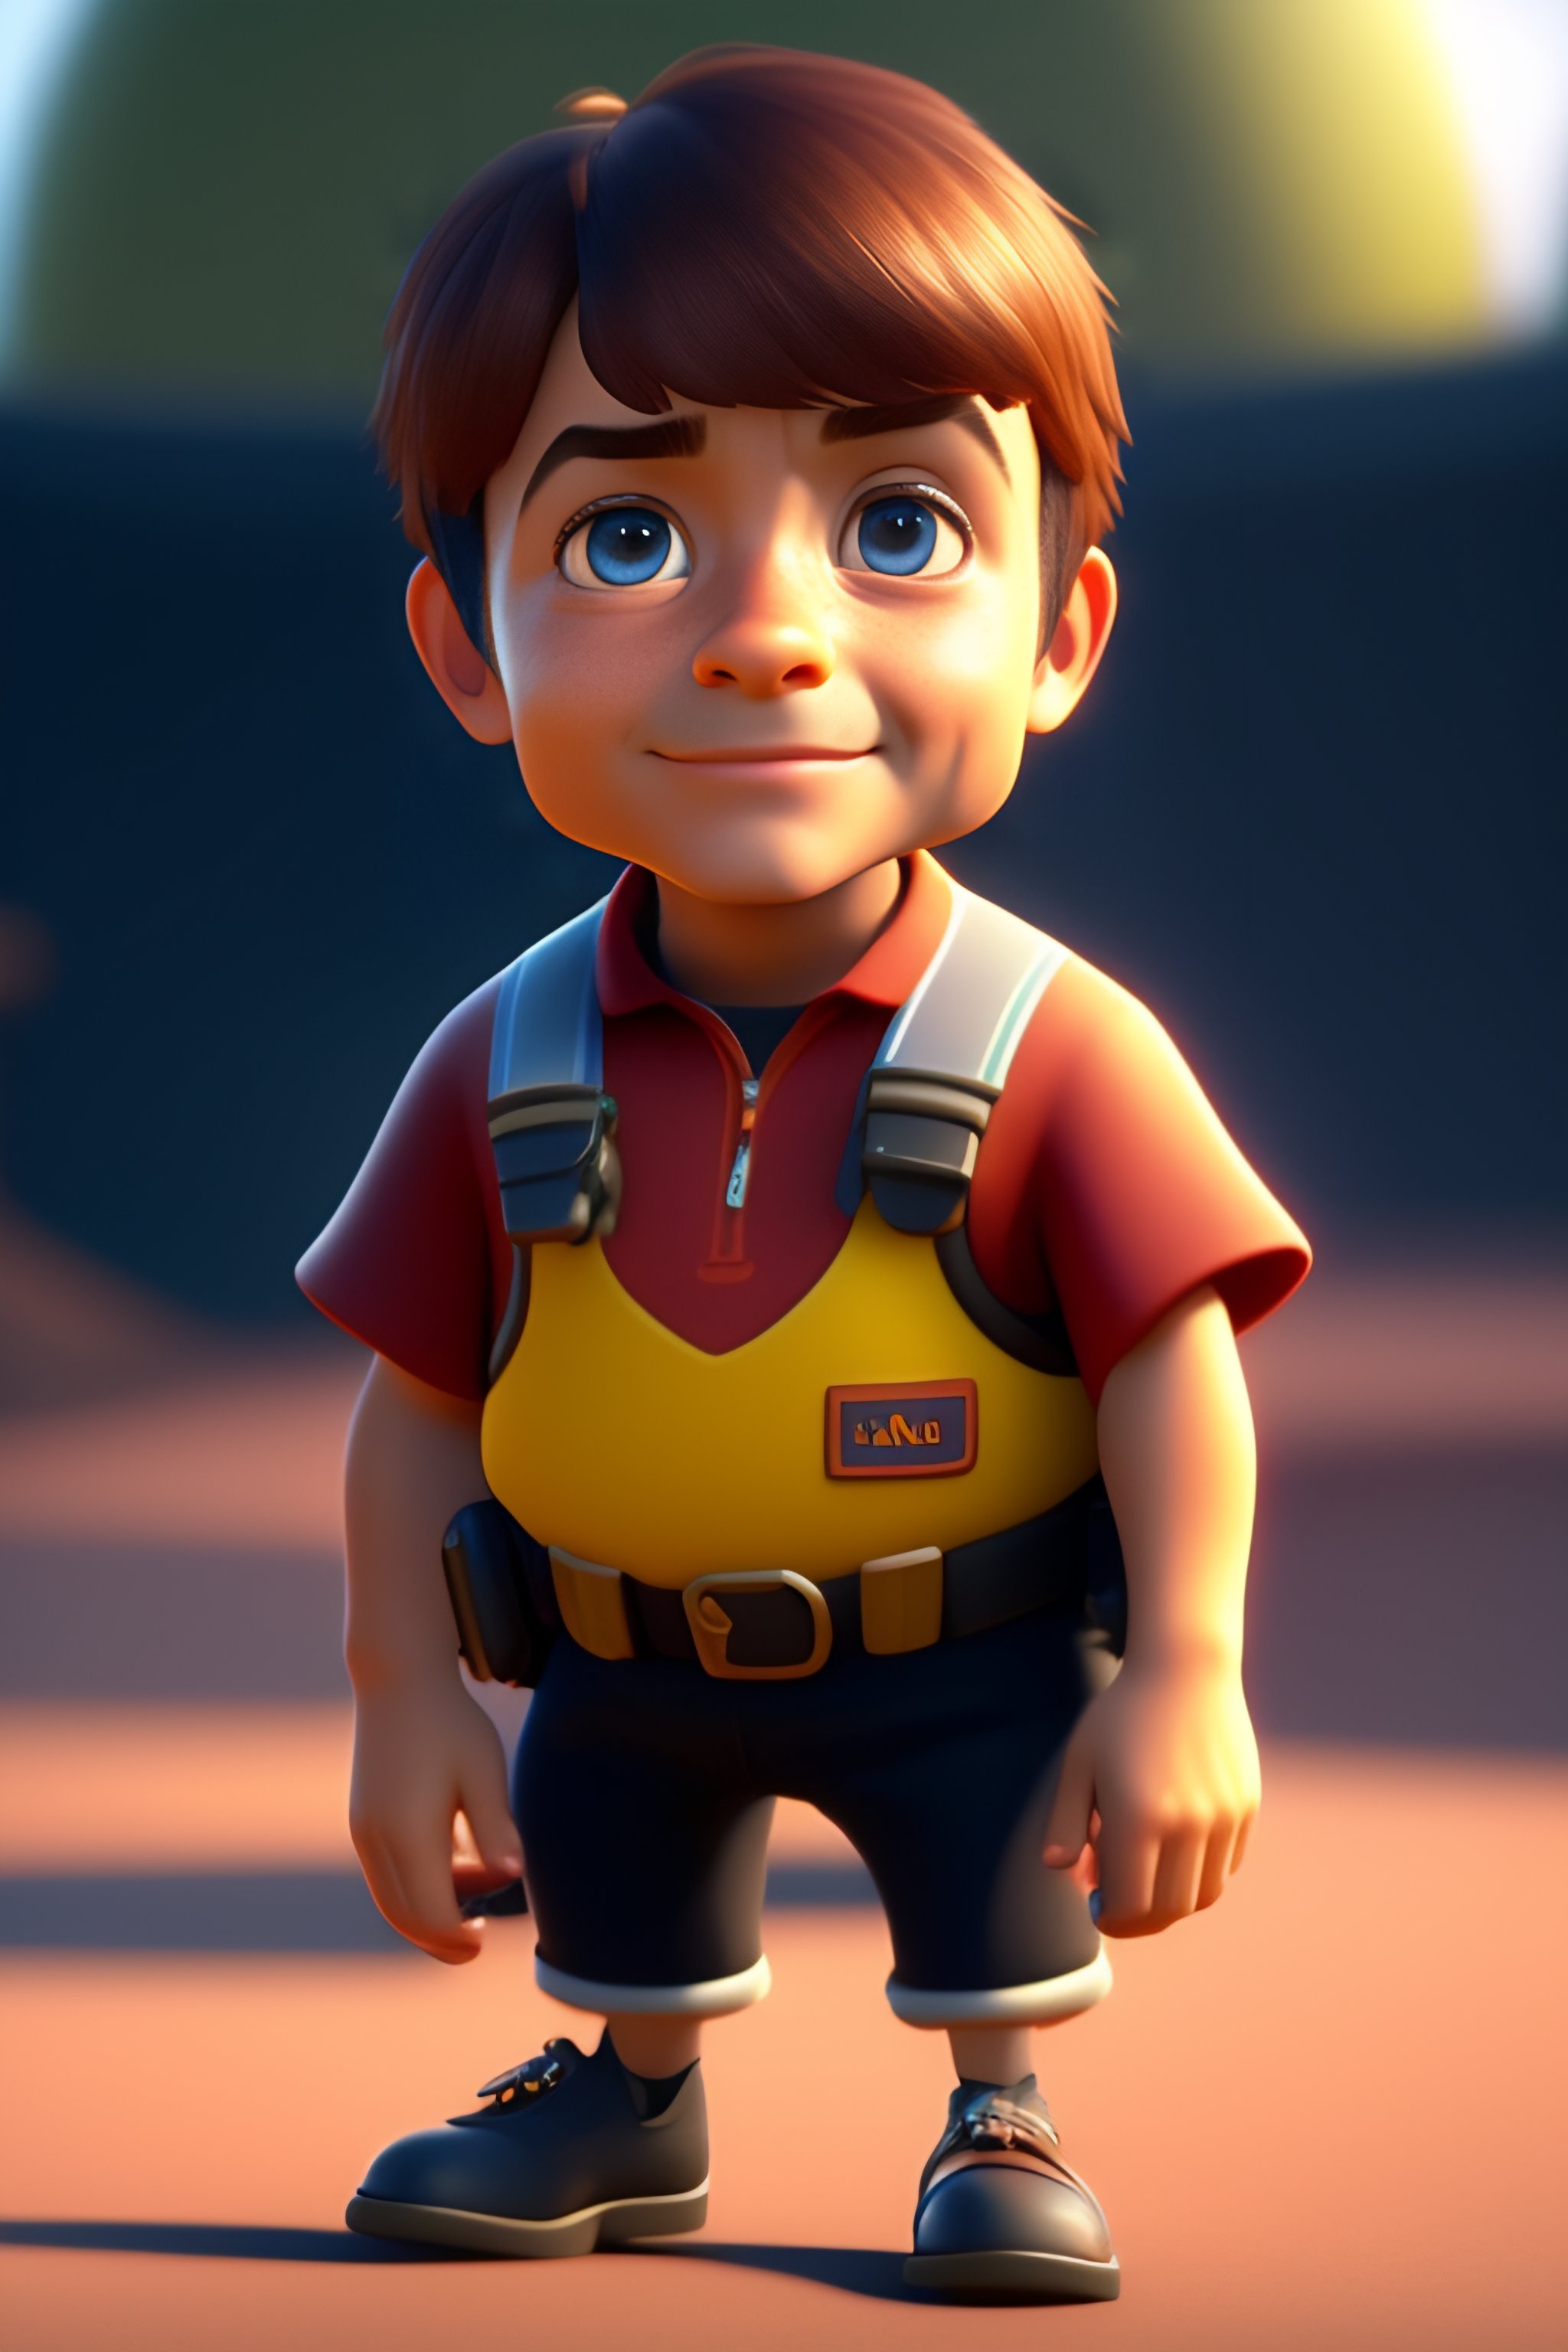 Lexica - Nicolas hulot as a pixar disney character caricature cute from ...